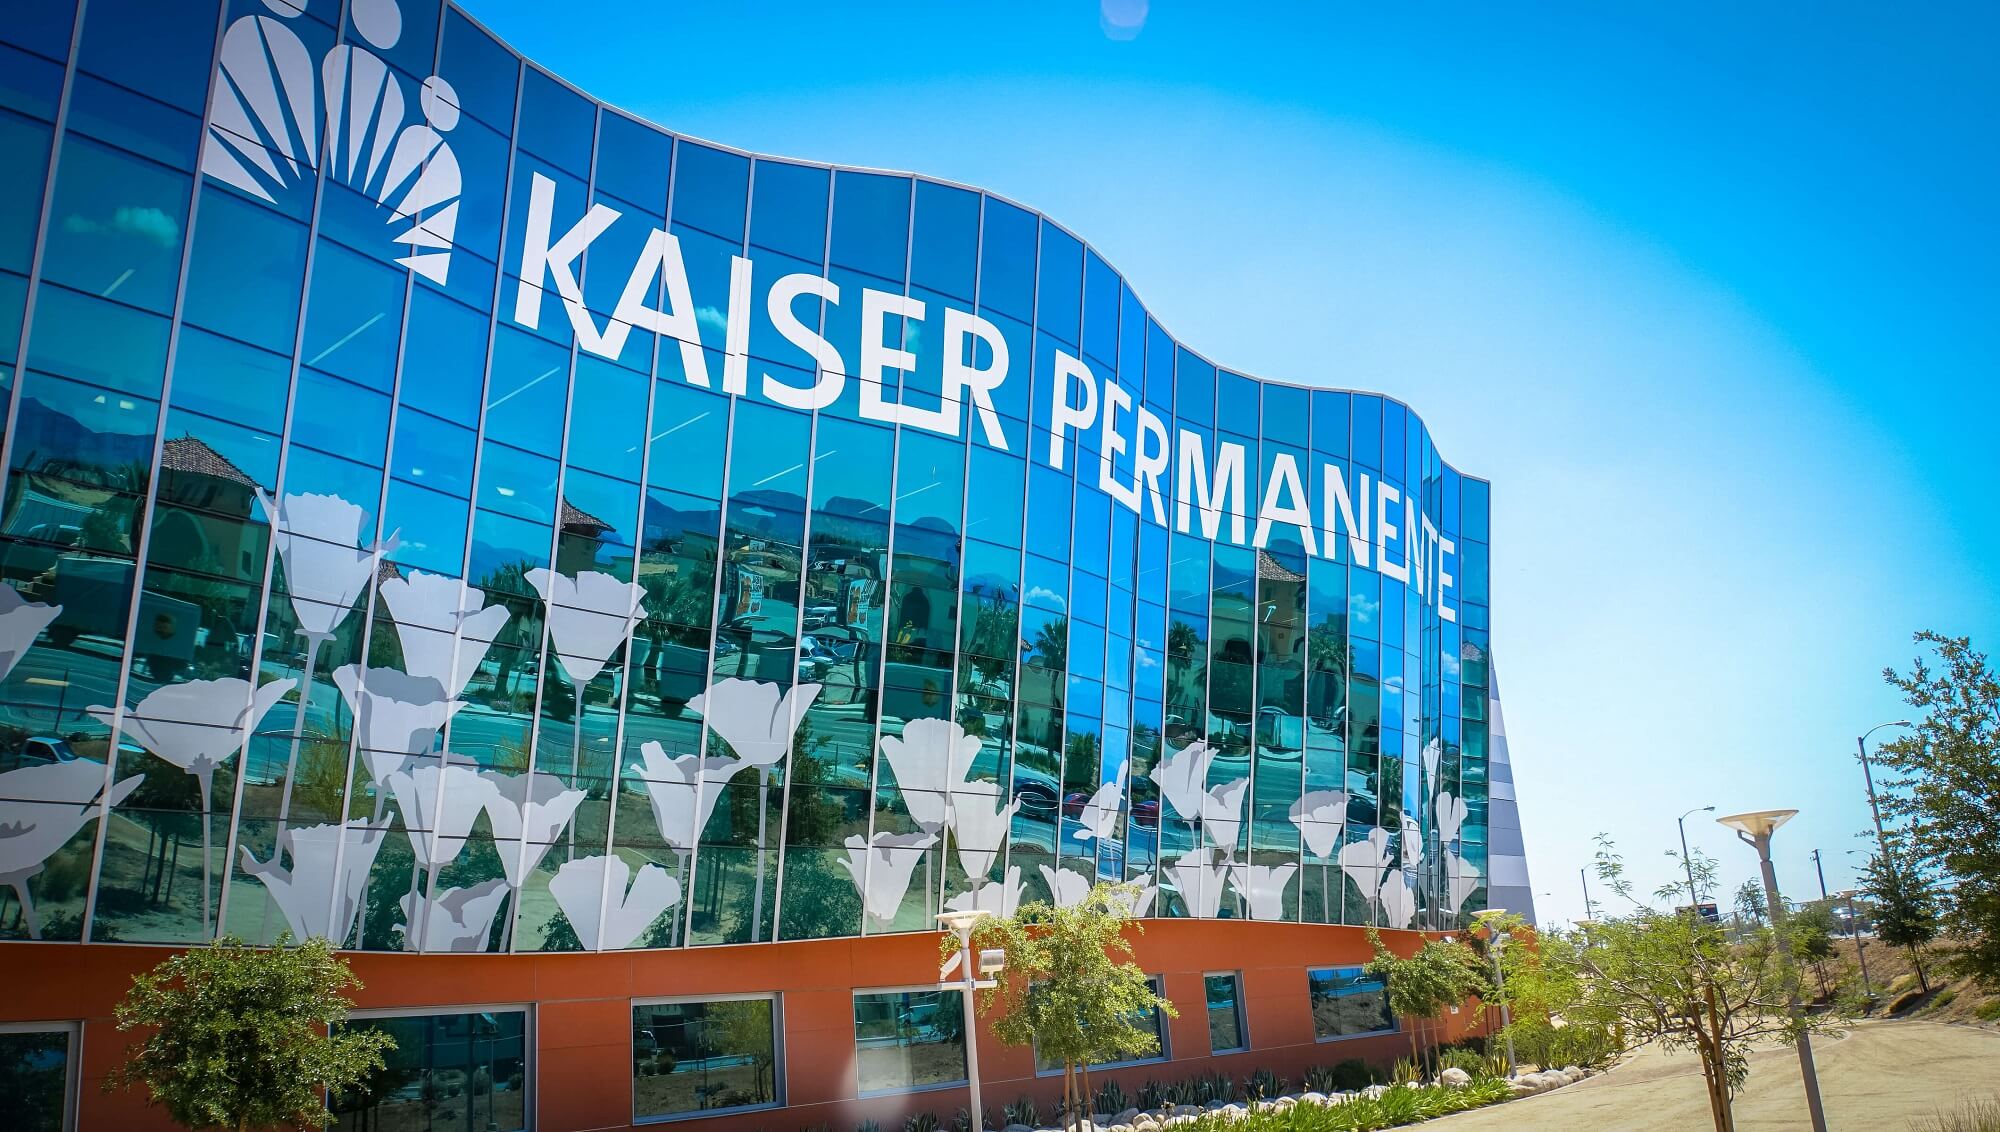 Is kaiser permanente coming to arizona humane society for dogs near me